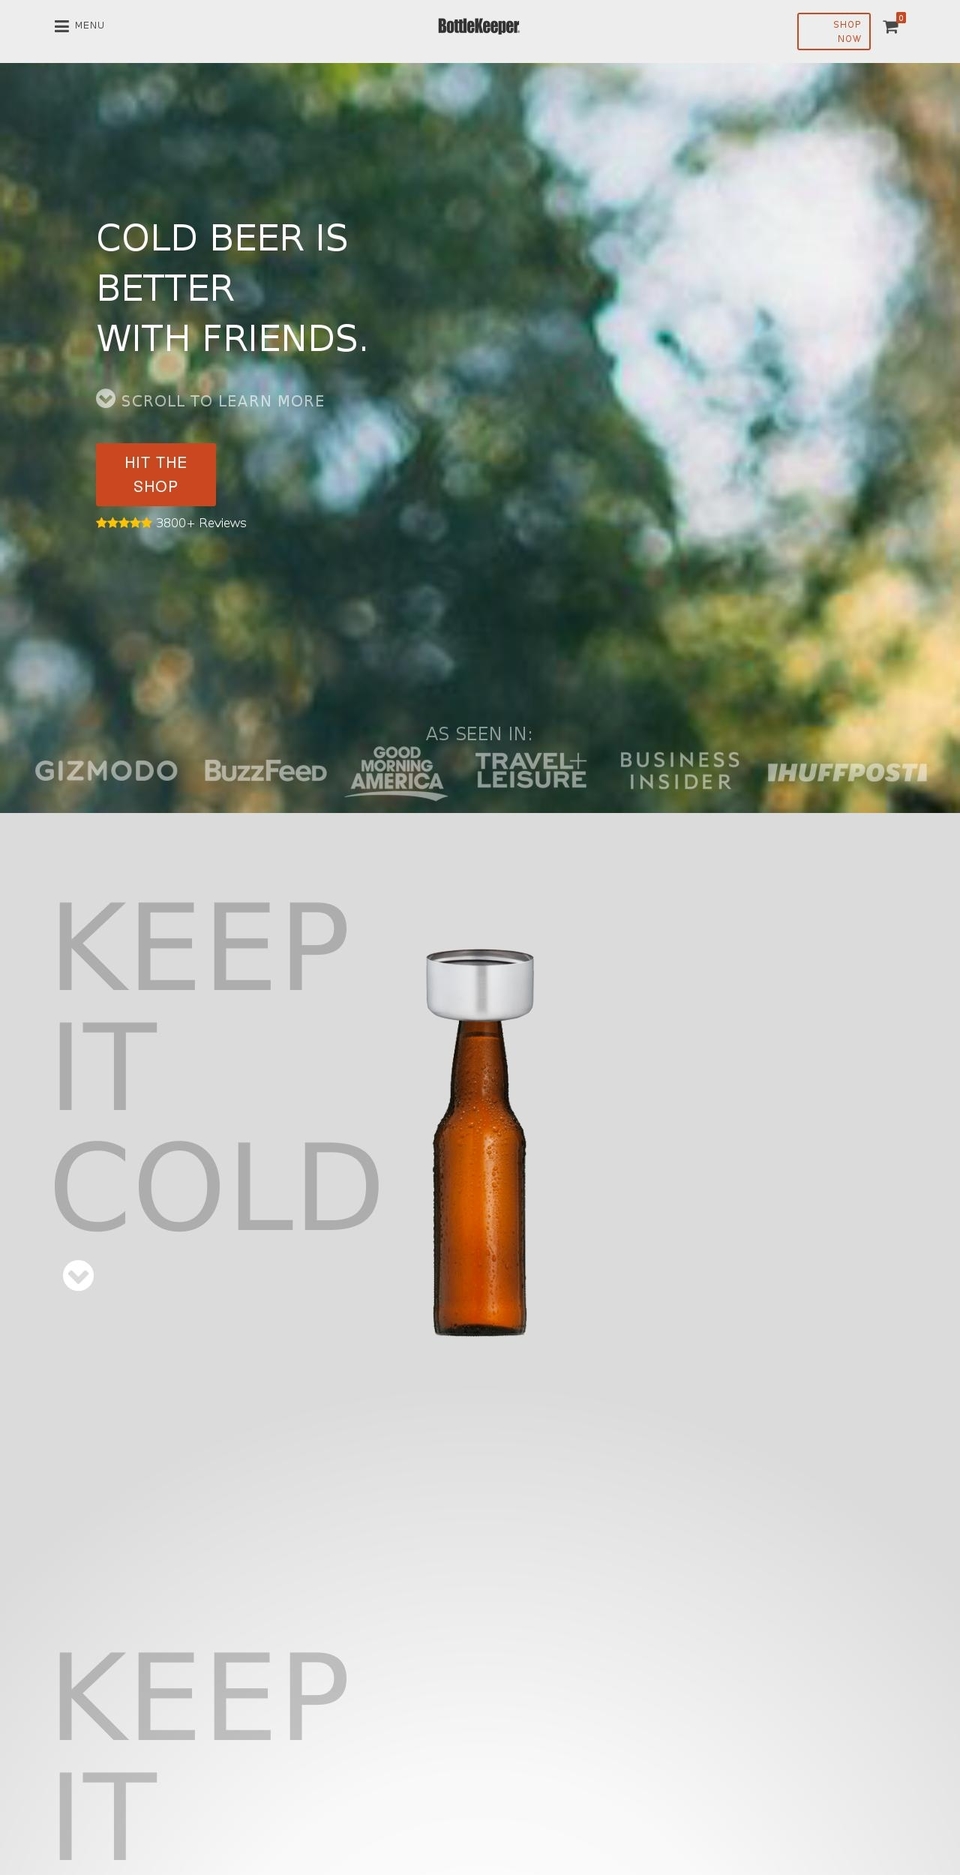 STAGING 7.2.18 Shopify theme site example cankeeper.beer